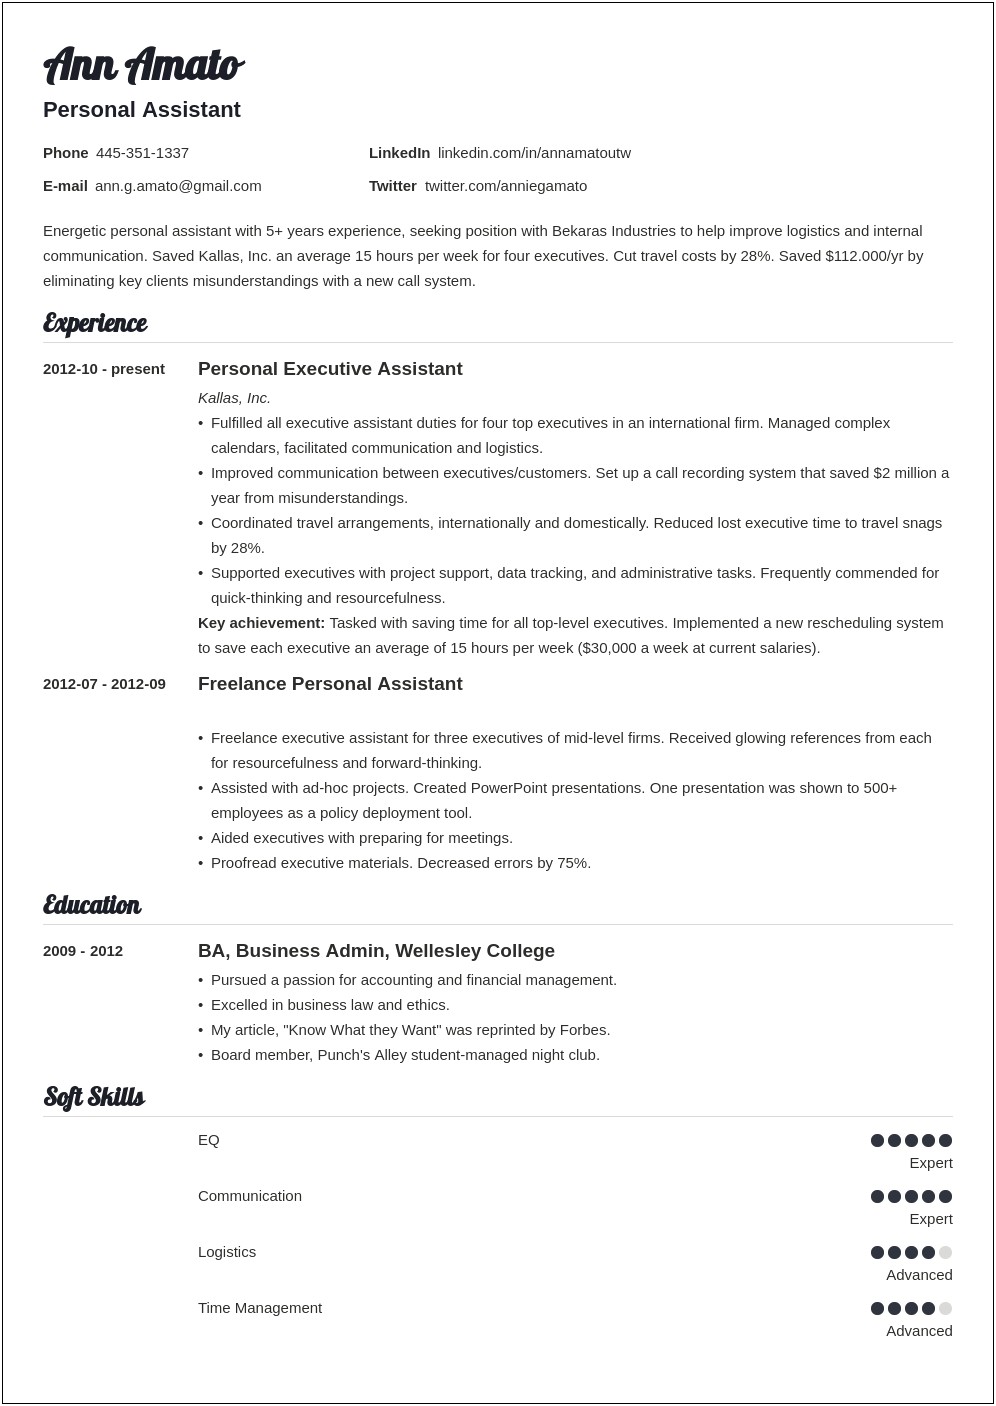 Personal Assistant Resume Objective Example